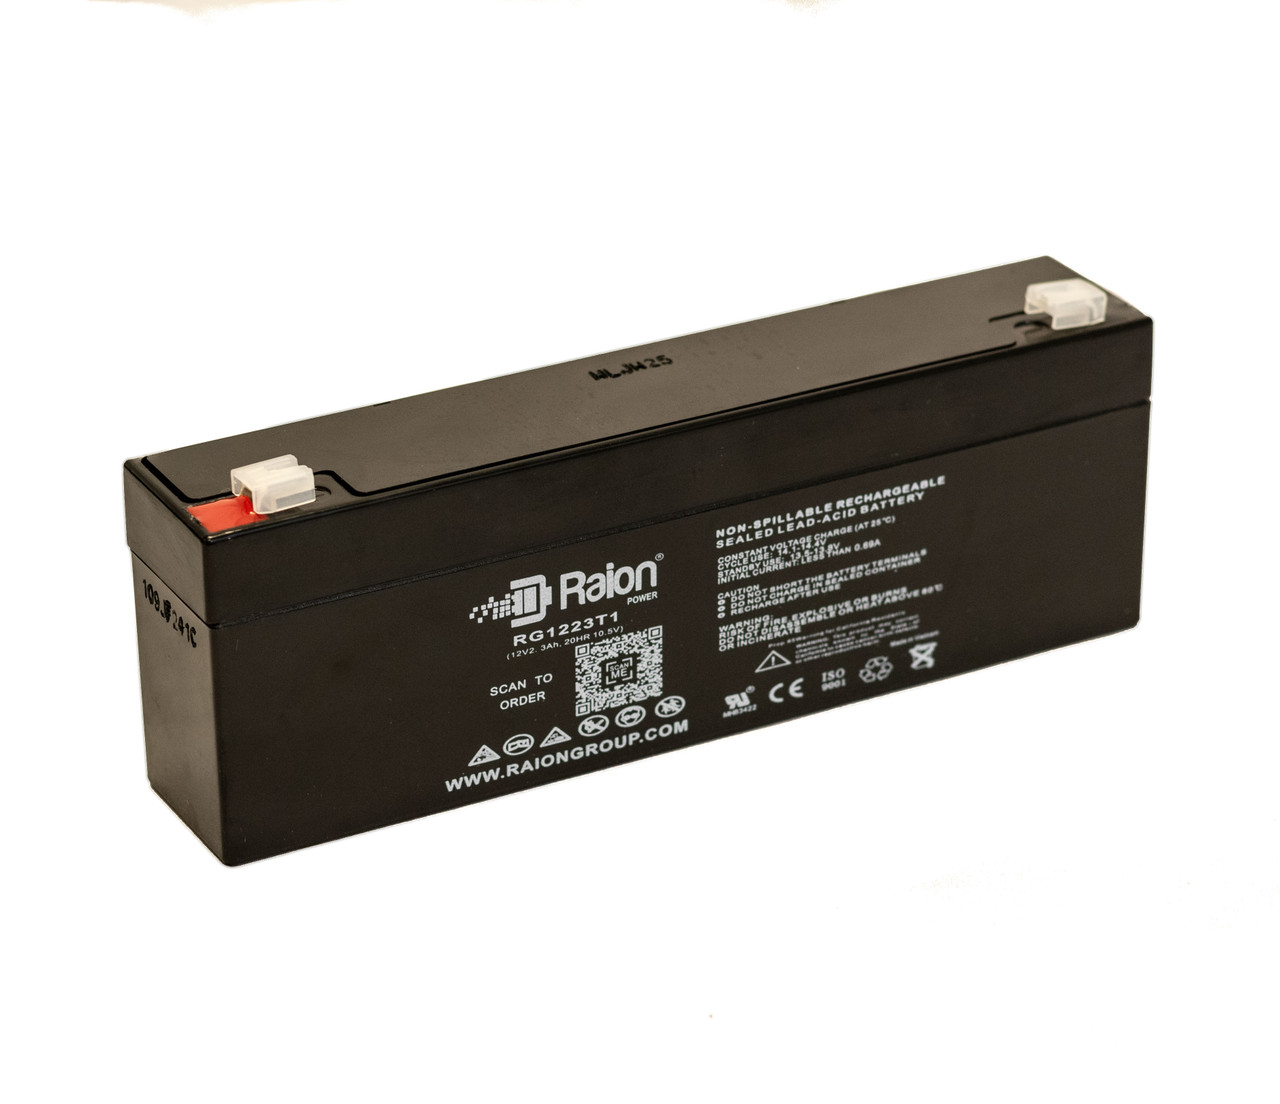 Raion Power RG1223T1 Replacement Battery for Ohmeda 3760P